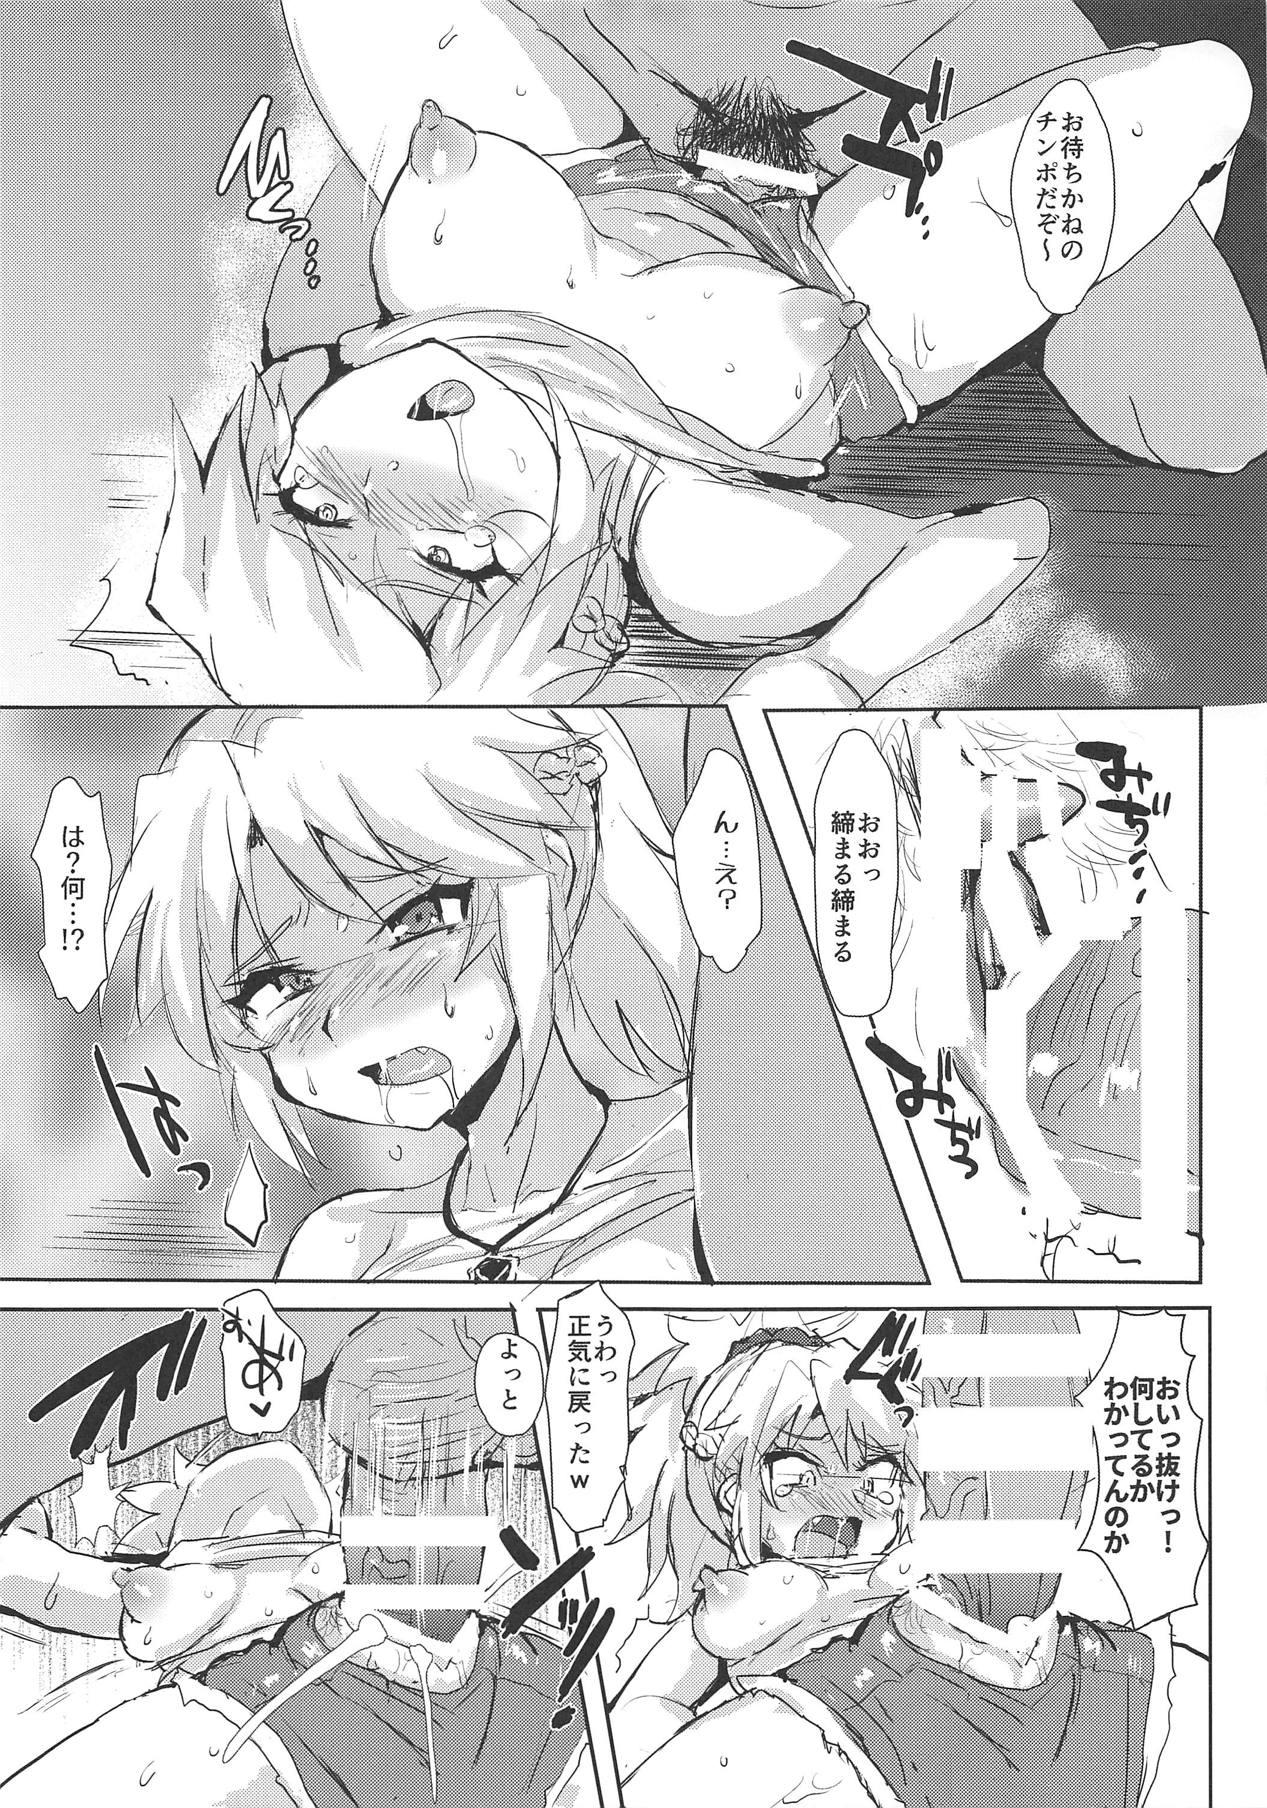 Massages Mordred Kyousei Renzoku Zecchou - Fate grand order Boy - Page 12